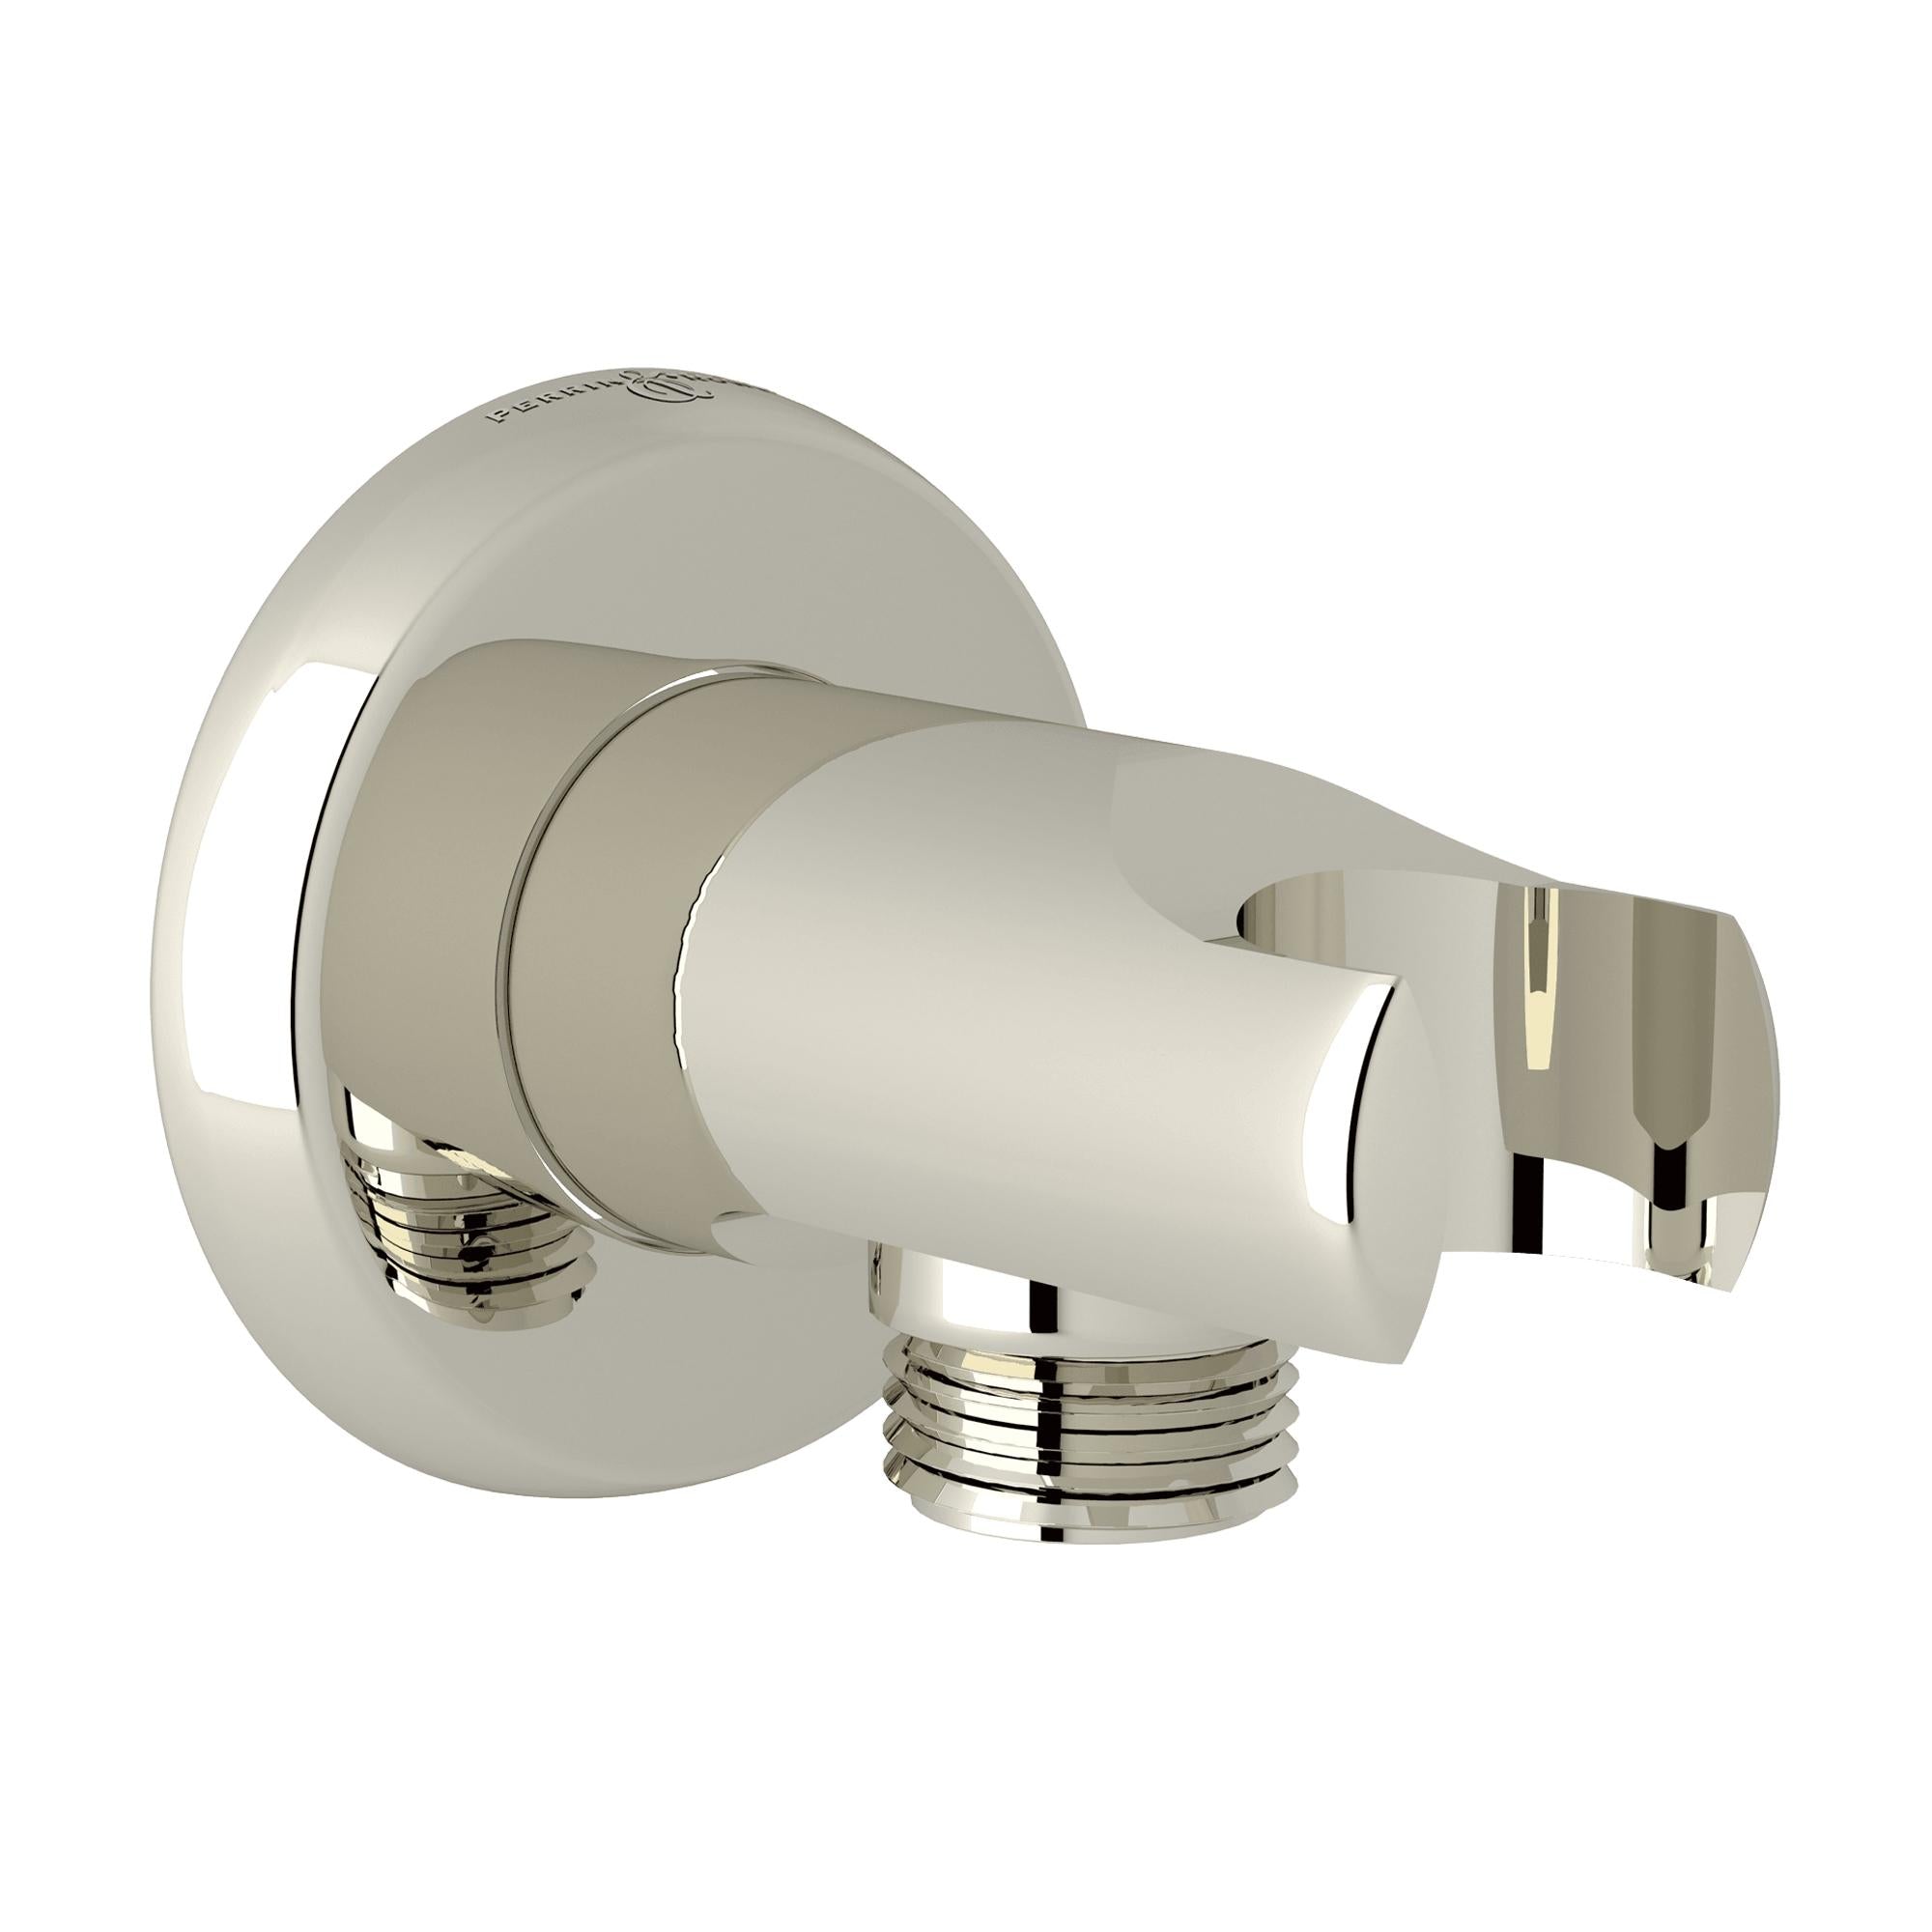 Perrin & Rowe U.5302 Handshower Outlet With Holder